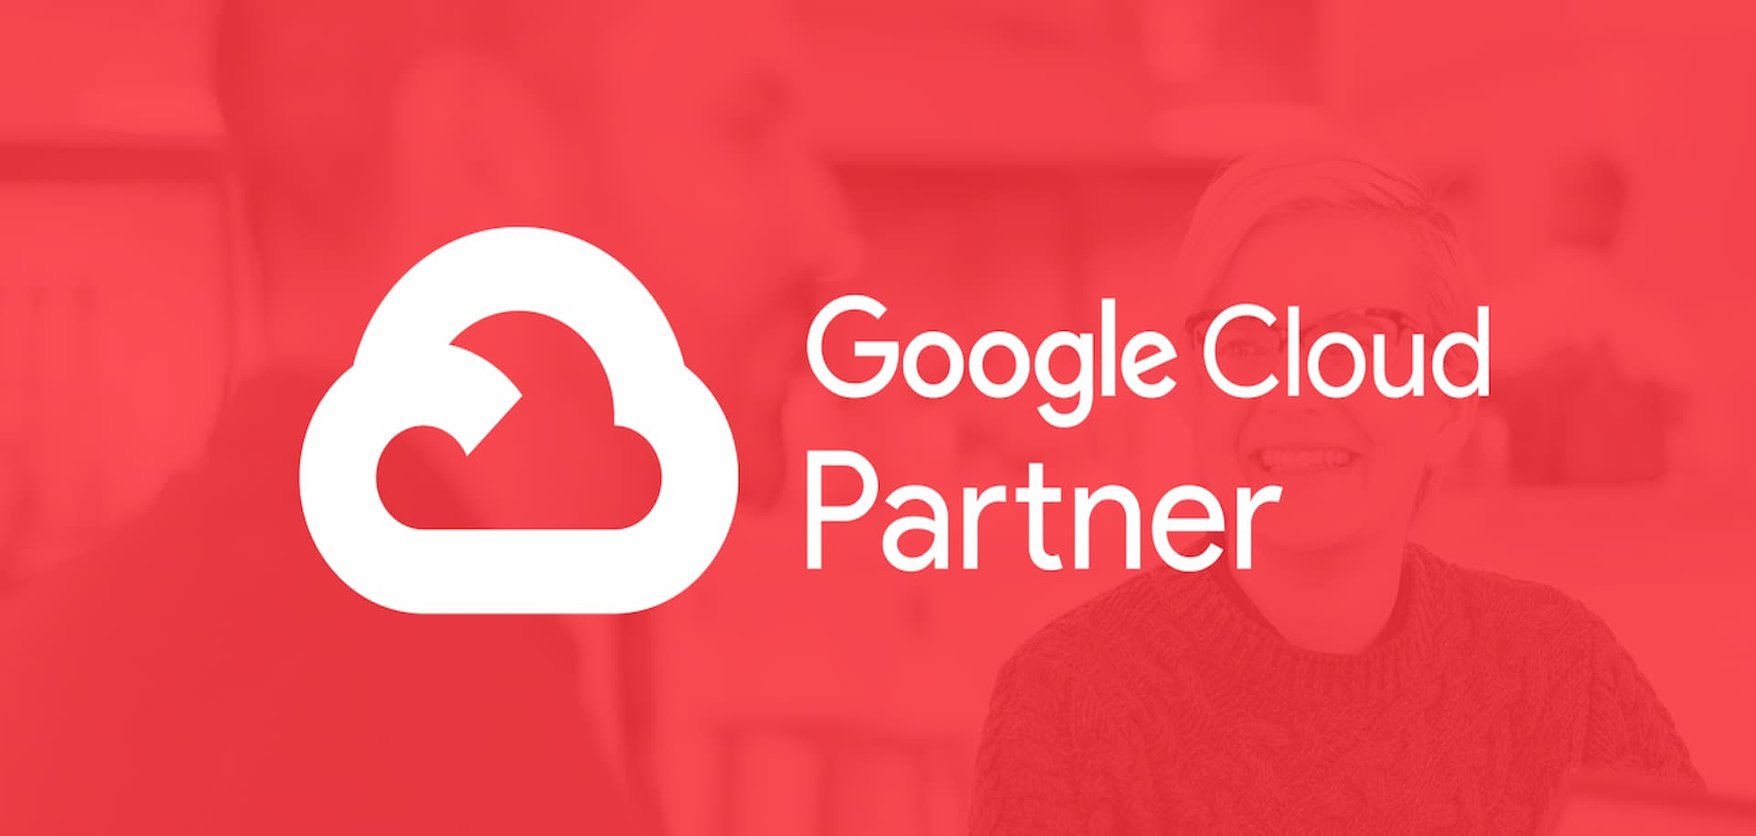 AND Digital Achieves Sought-After Google Cloud Service Partner Status(1)